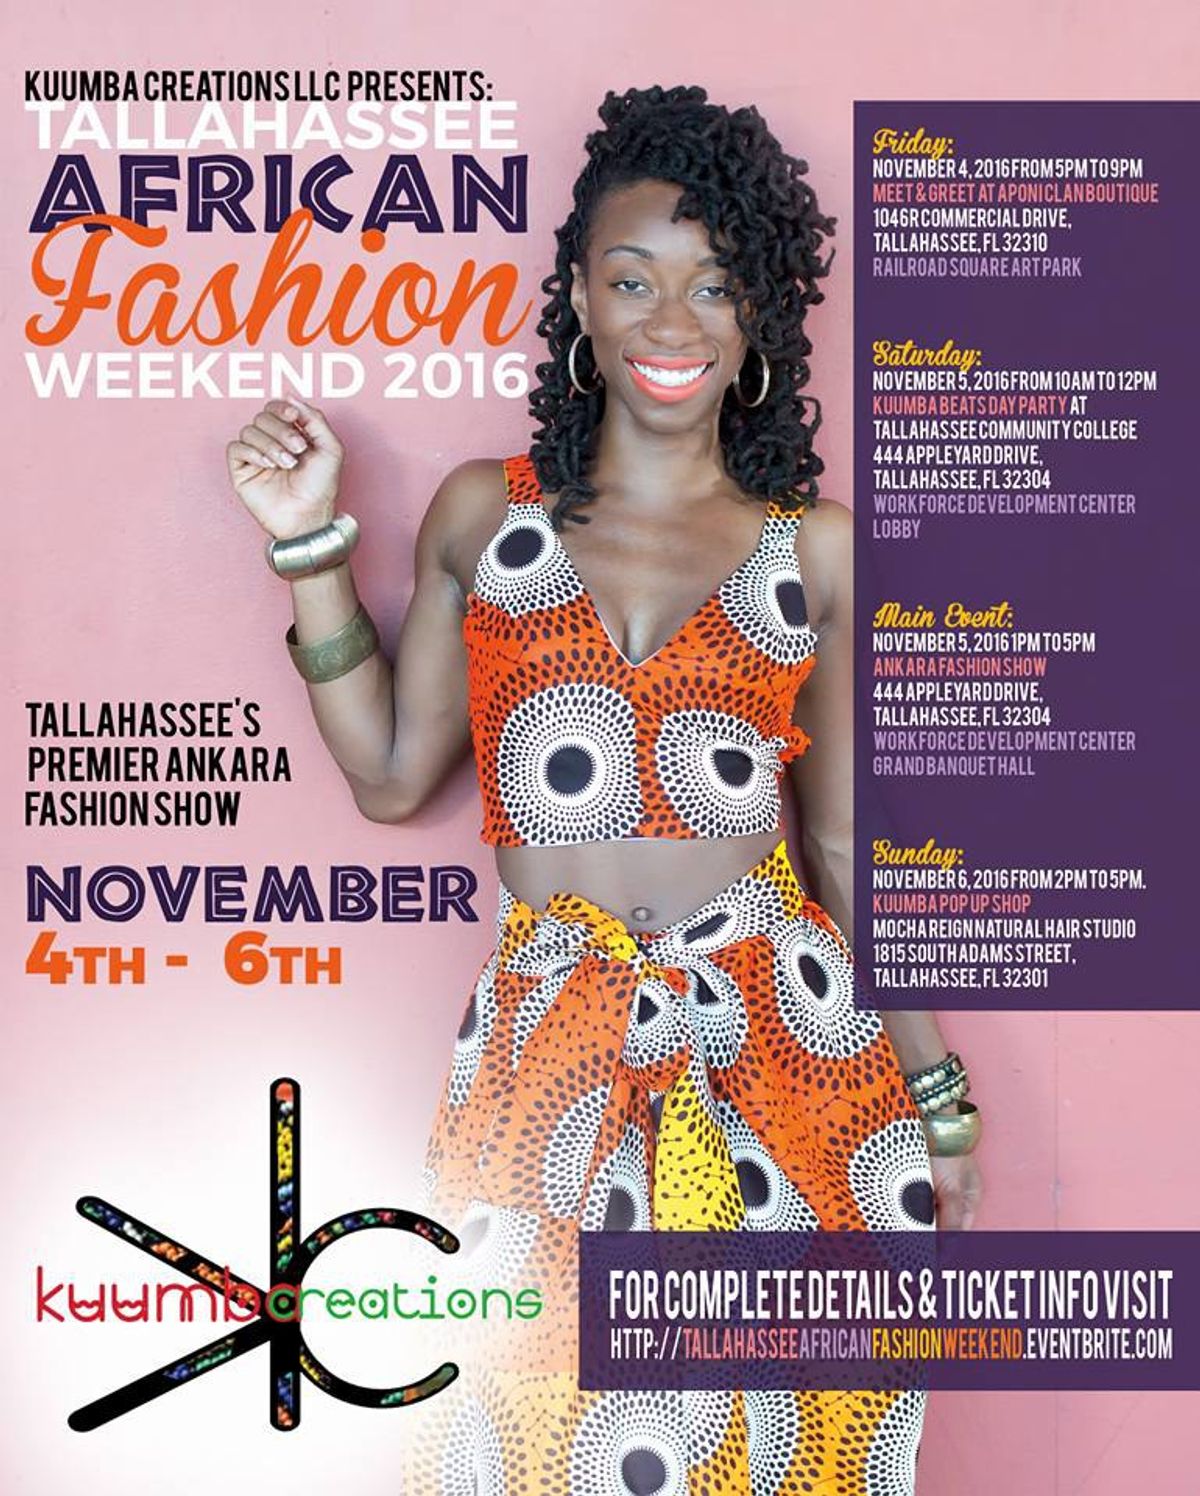 History in the Making for African Fashion Weekend 2016